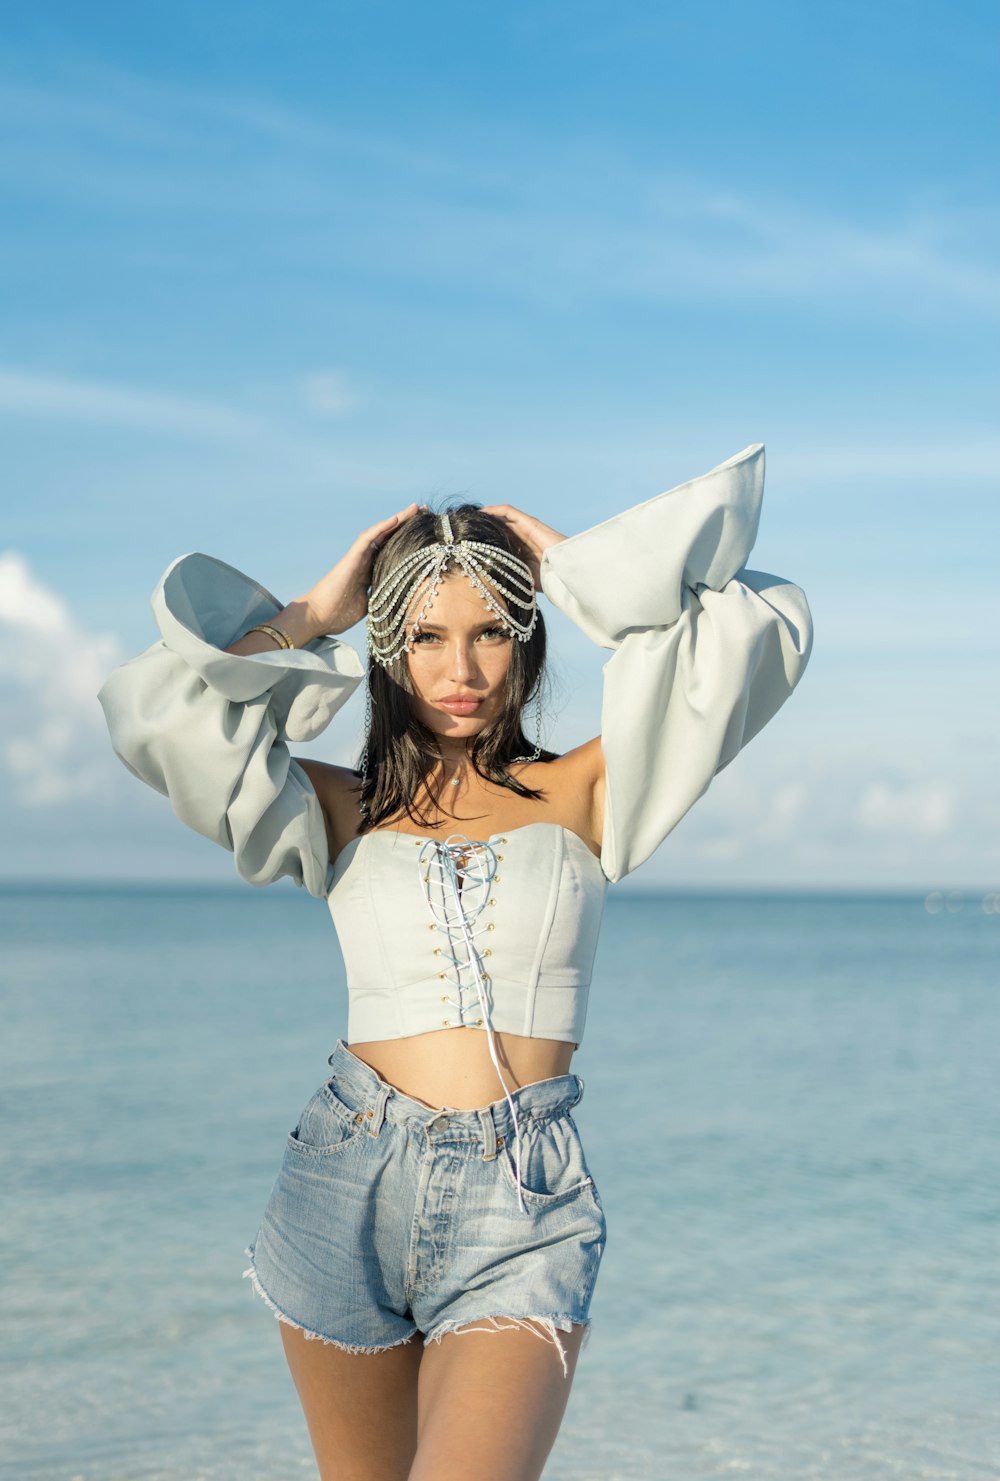 woman in white crop top and blue denim jeans standing on beach shore during daytime